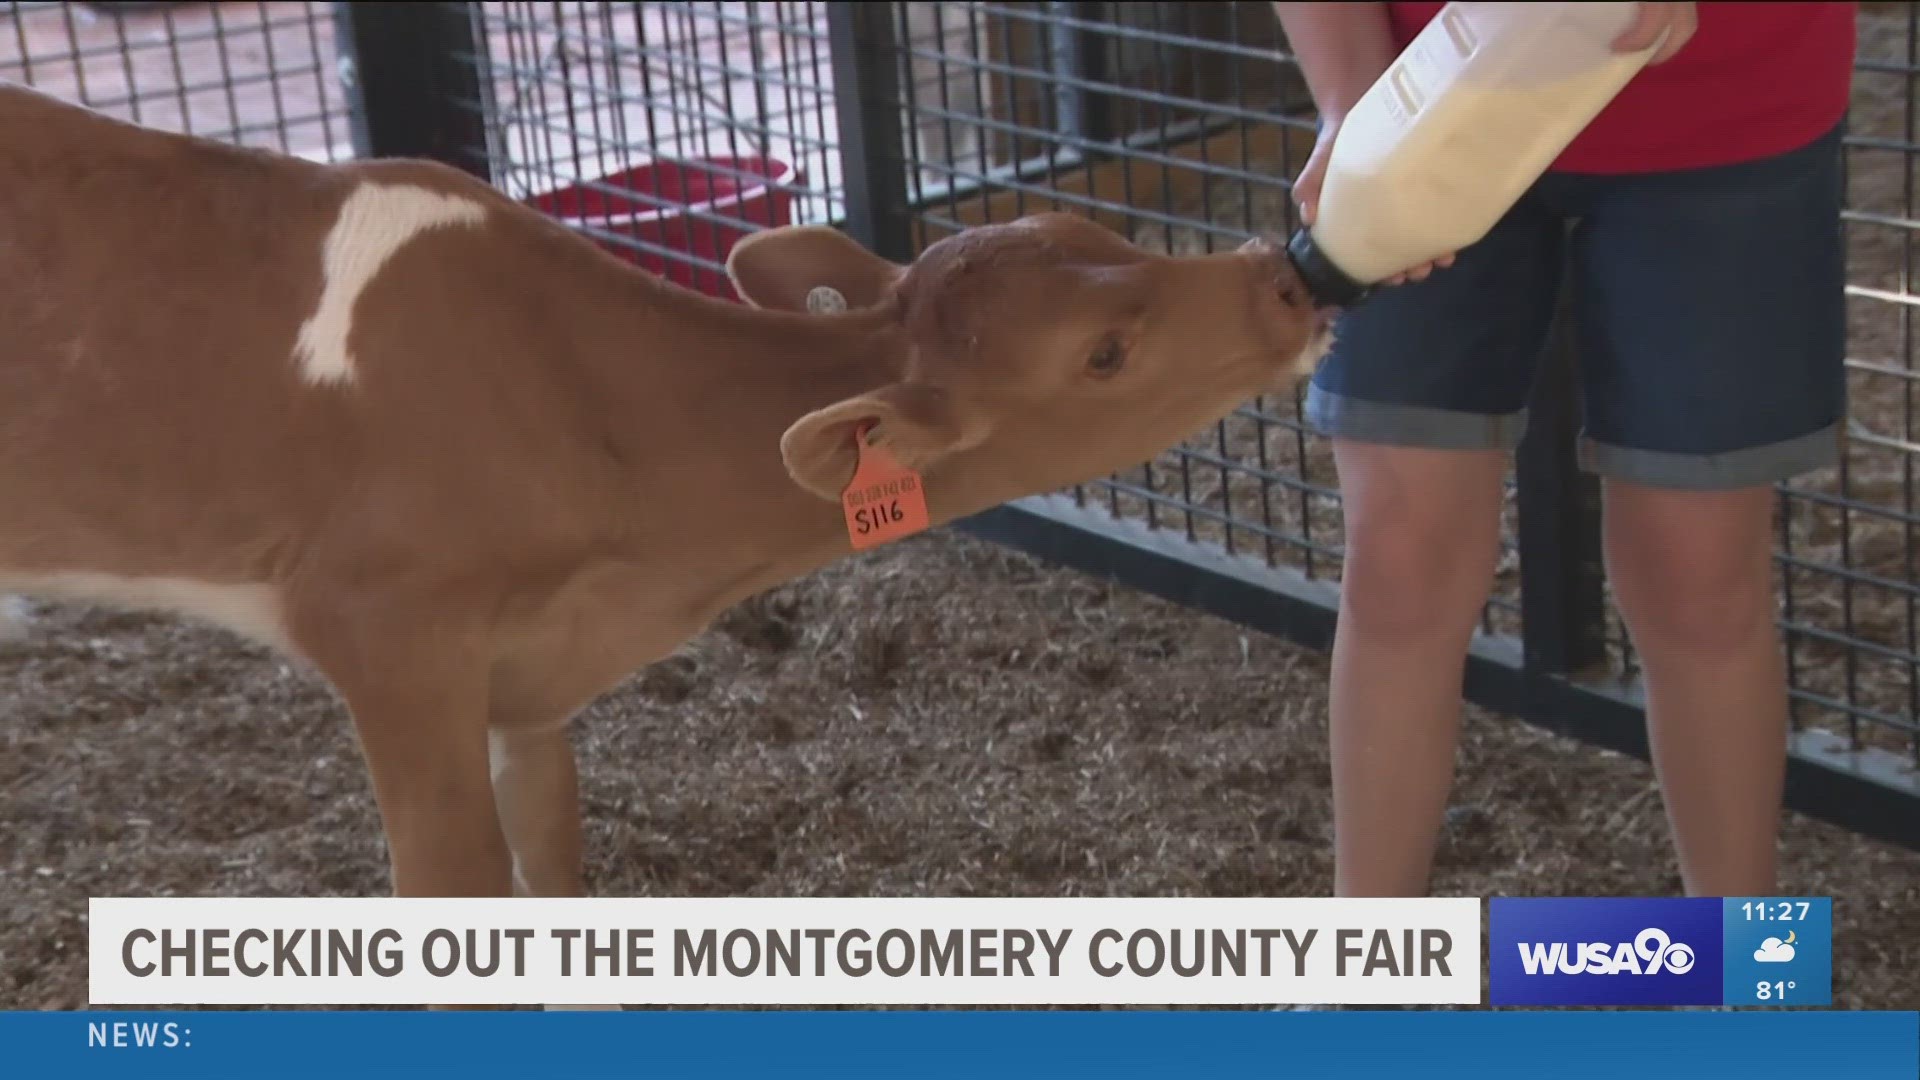 It's the kickoff weekend for the 74th annual Montgomery County Agricultural Fair, which runs through Saturday, August 19th.